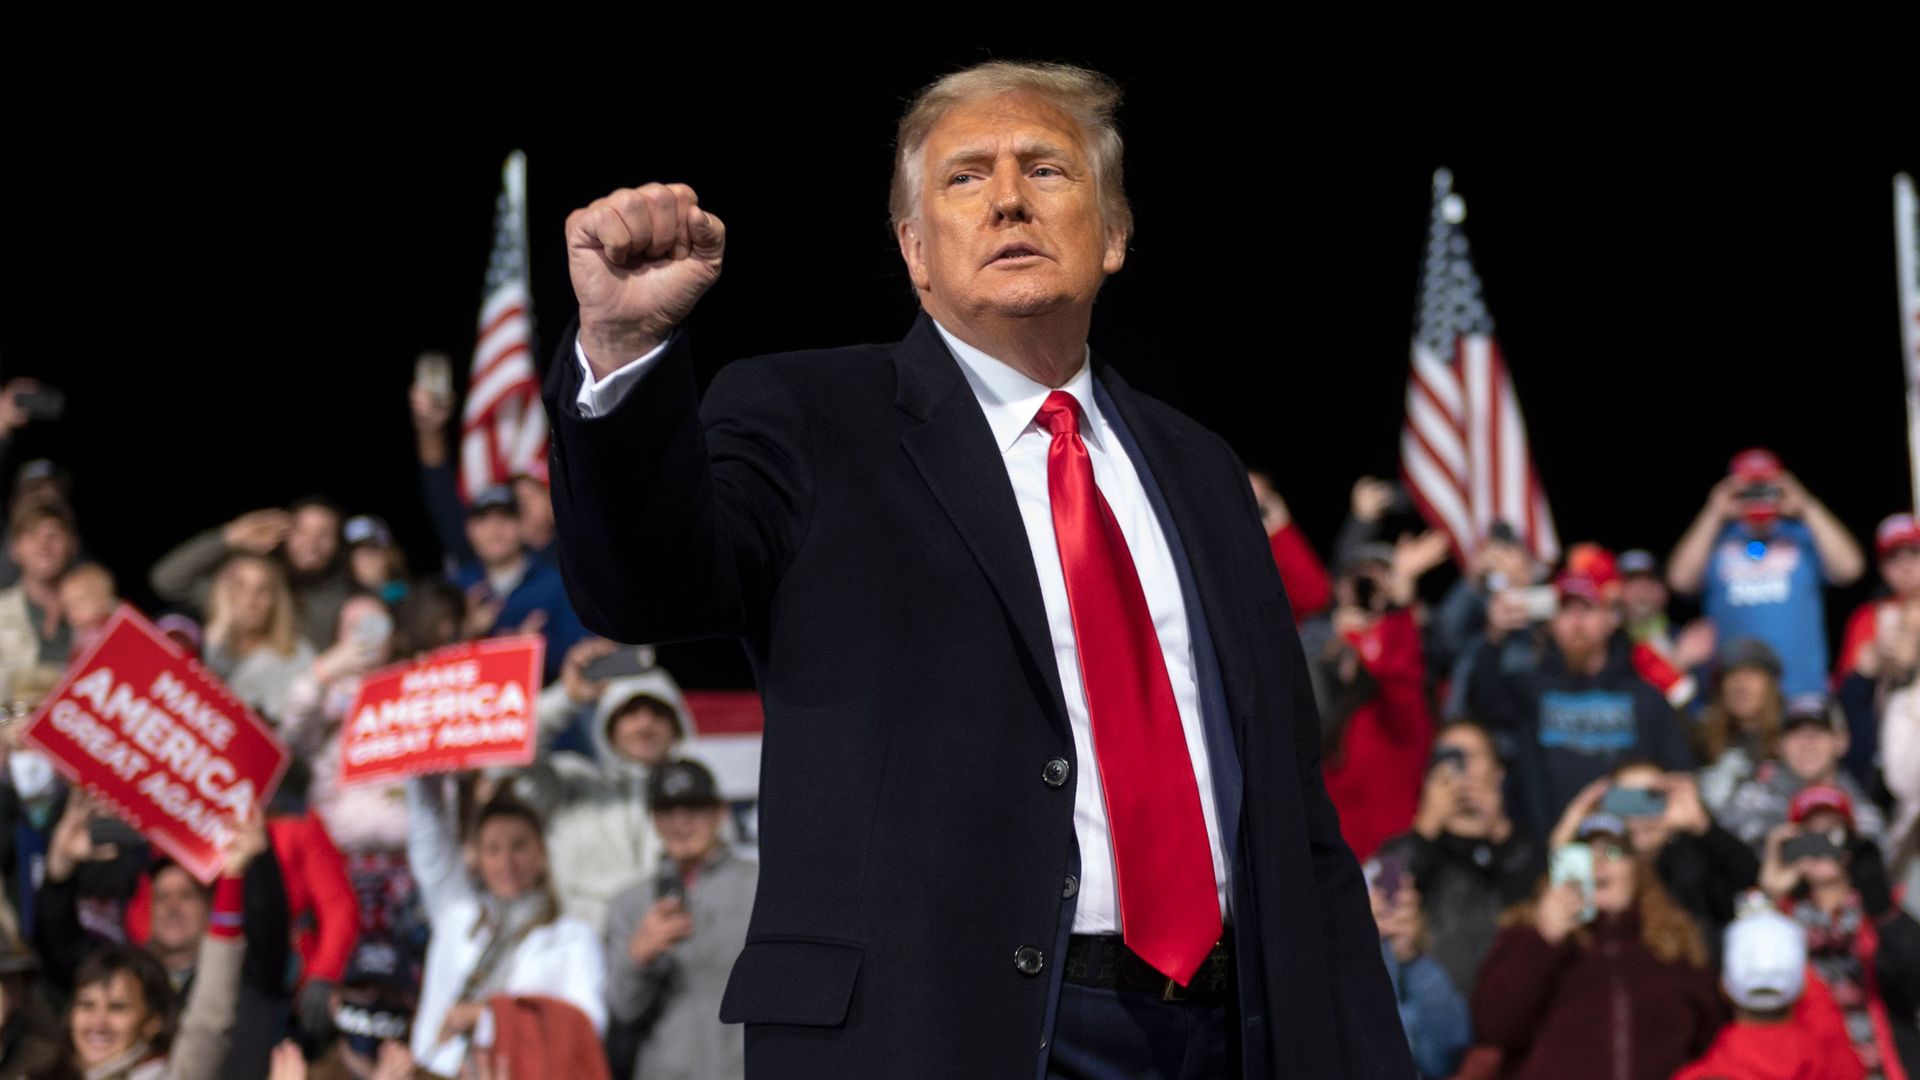 President Donald Trump holds up his fist as he leaves the stage at the end of a rally to support Republican Senate candidates at Valdosta Regional Airport in Valdosta, Georgia on December 5, 2020.